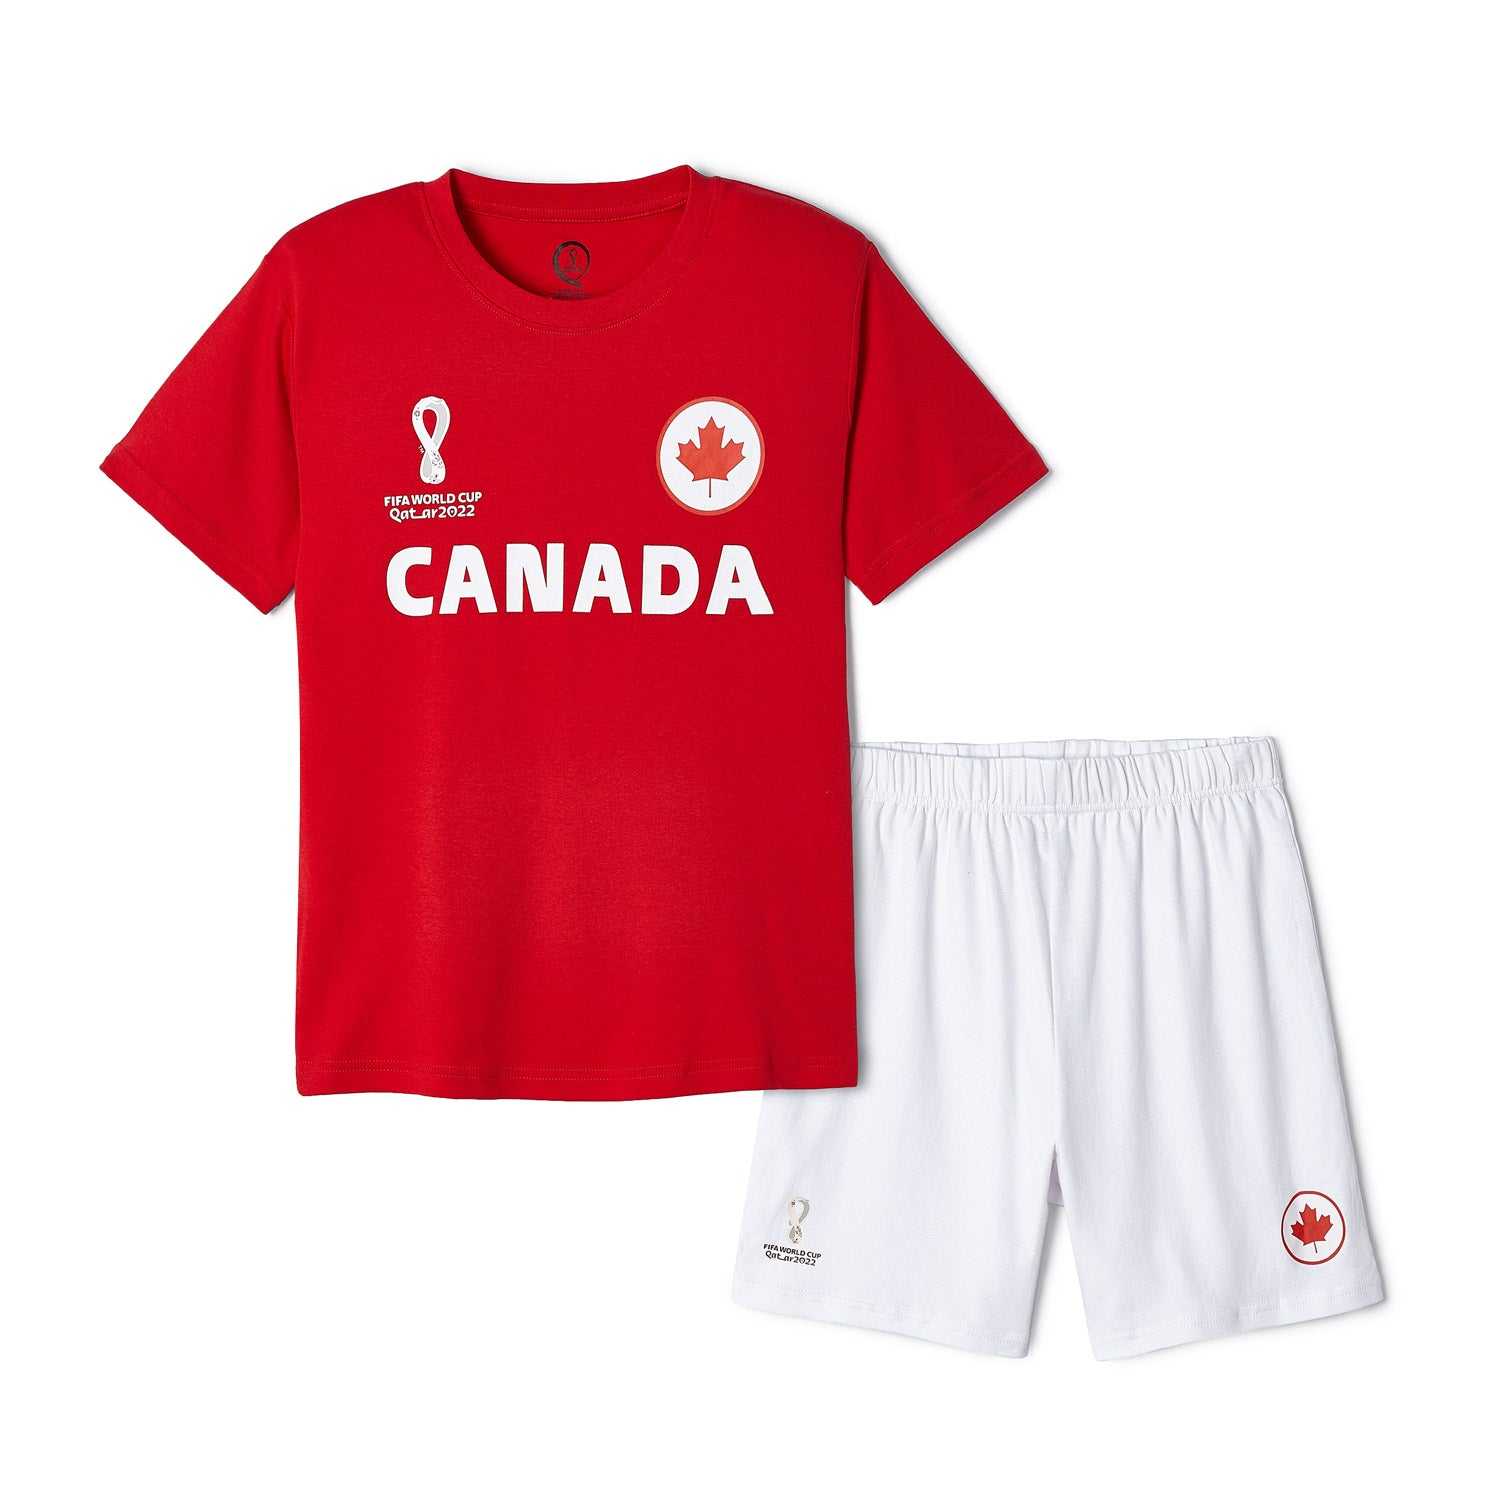 2022 World Cup Canada Tee & Short Set - Youth